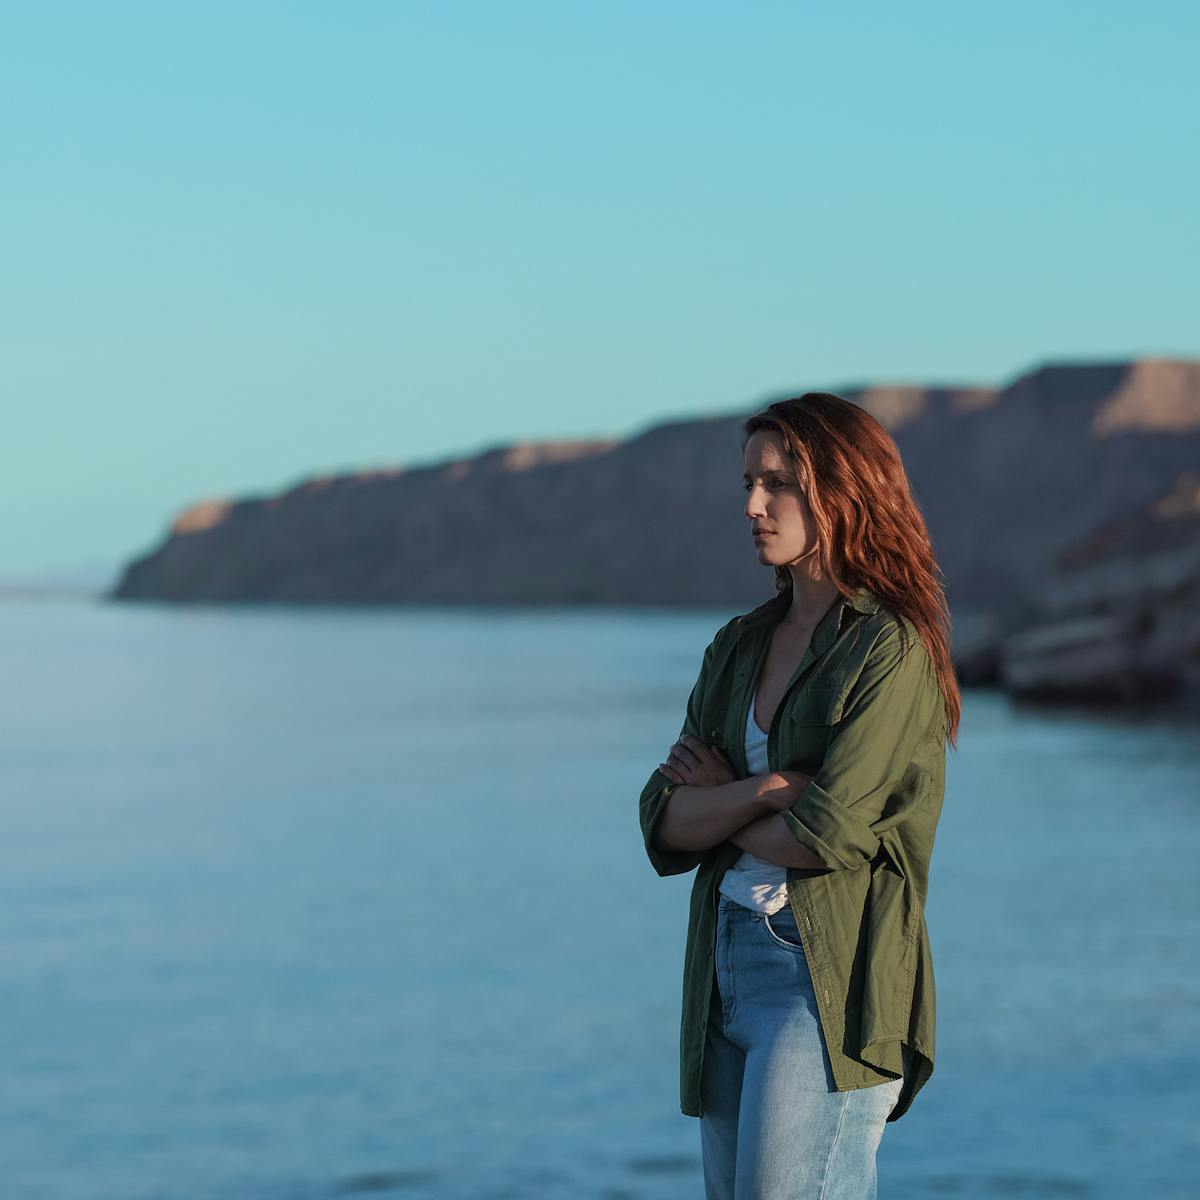 Sarah (Dianna Agron) wears a green jacket and stands by a beautiful blue ocean.